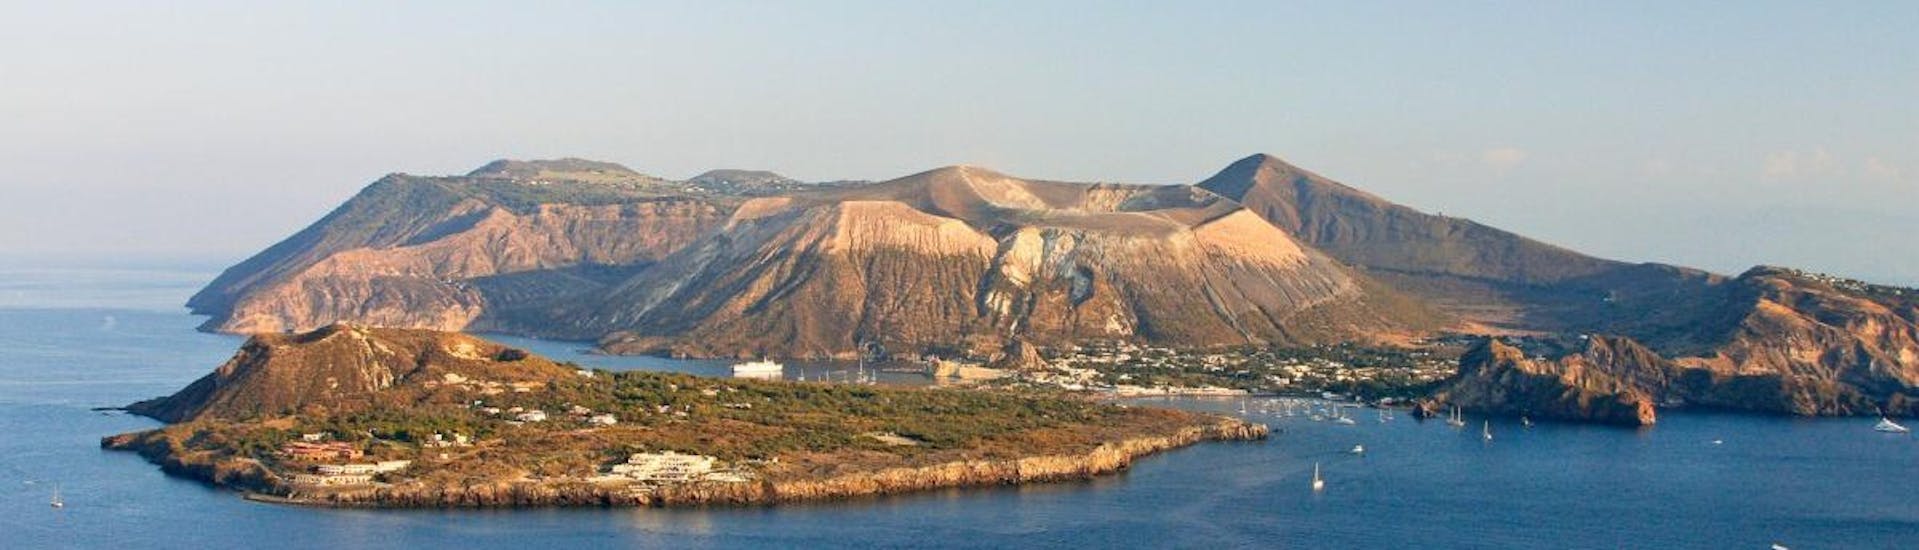 Landscape of the island of Vulcano, where the Boat Trip around Vulcano with Guided Tour of Vulcanello takes place, with Clarissa Viaggi Isole Eolie.